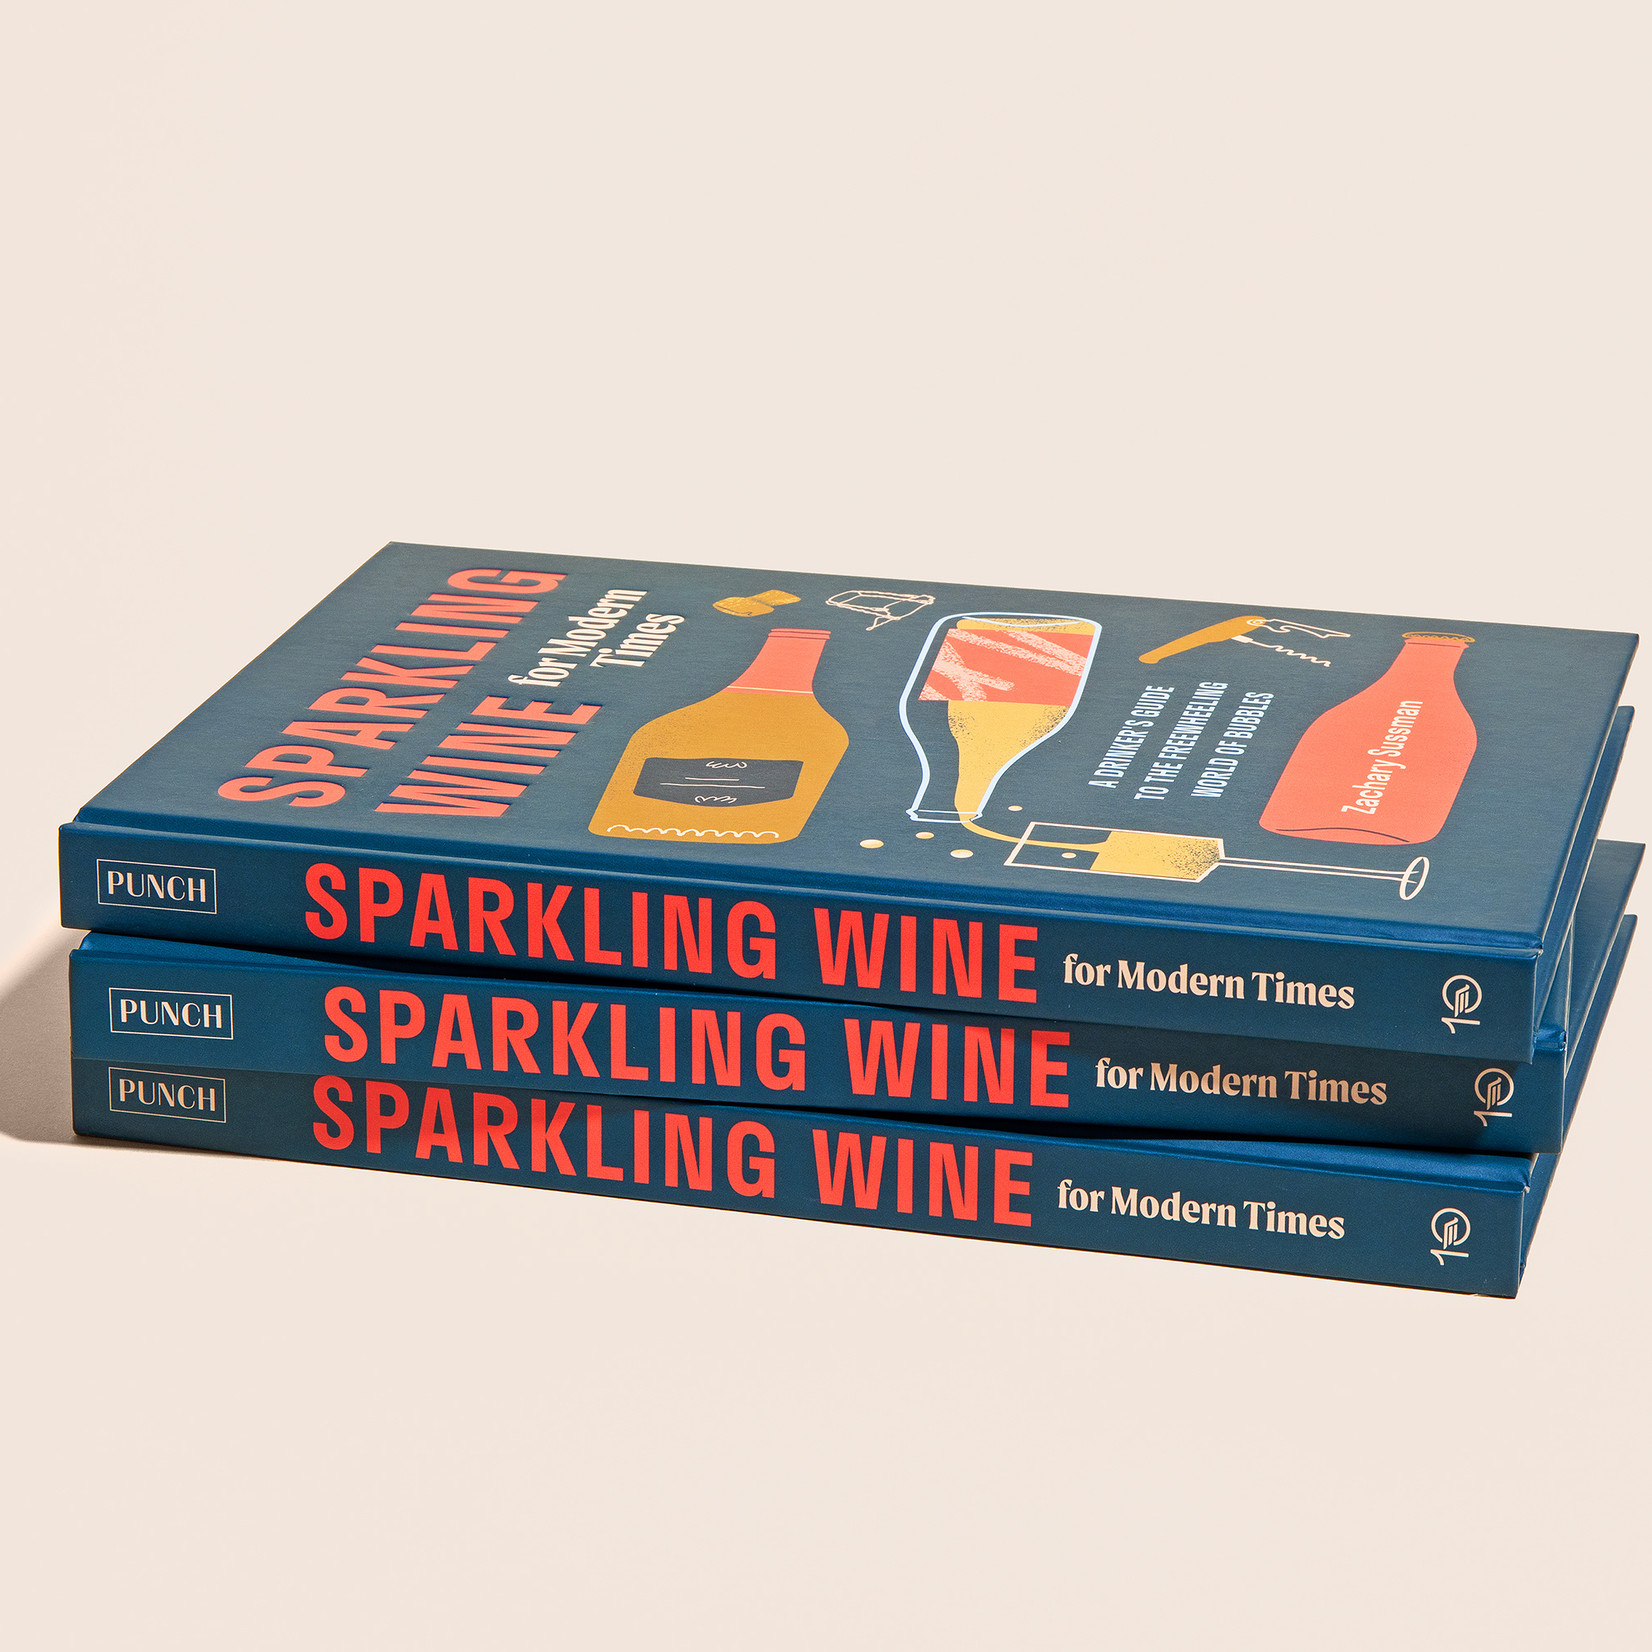 Sparkling Wine for Modern Times